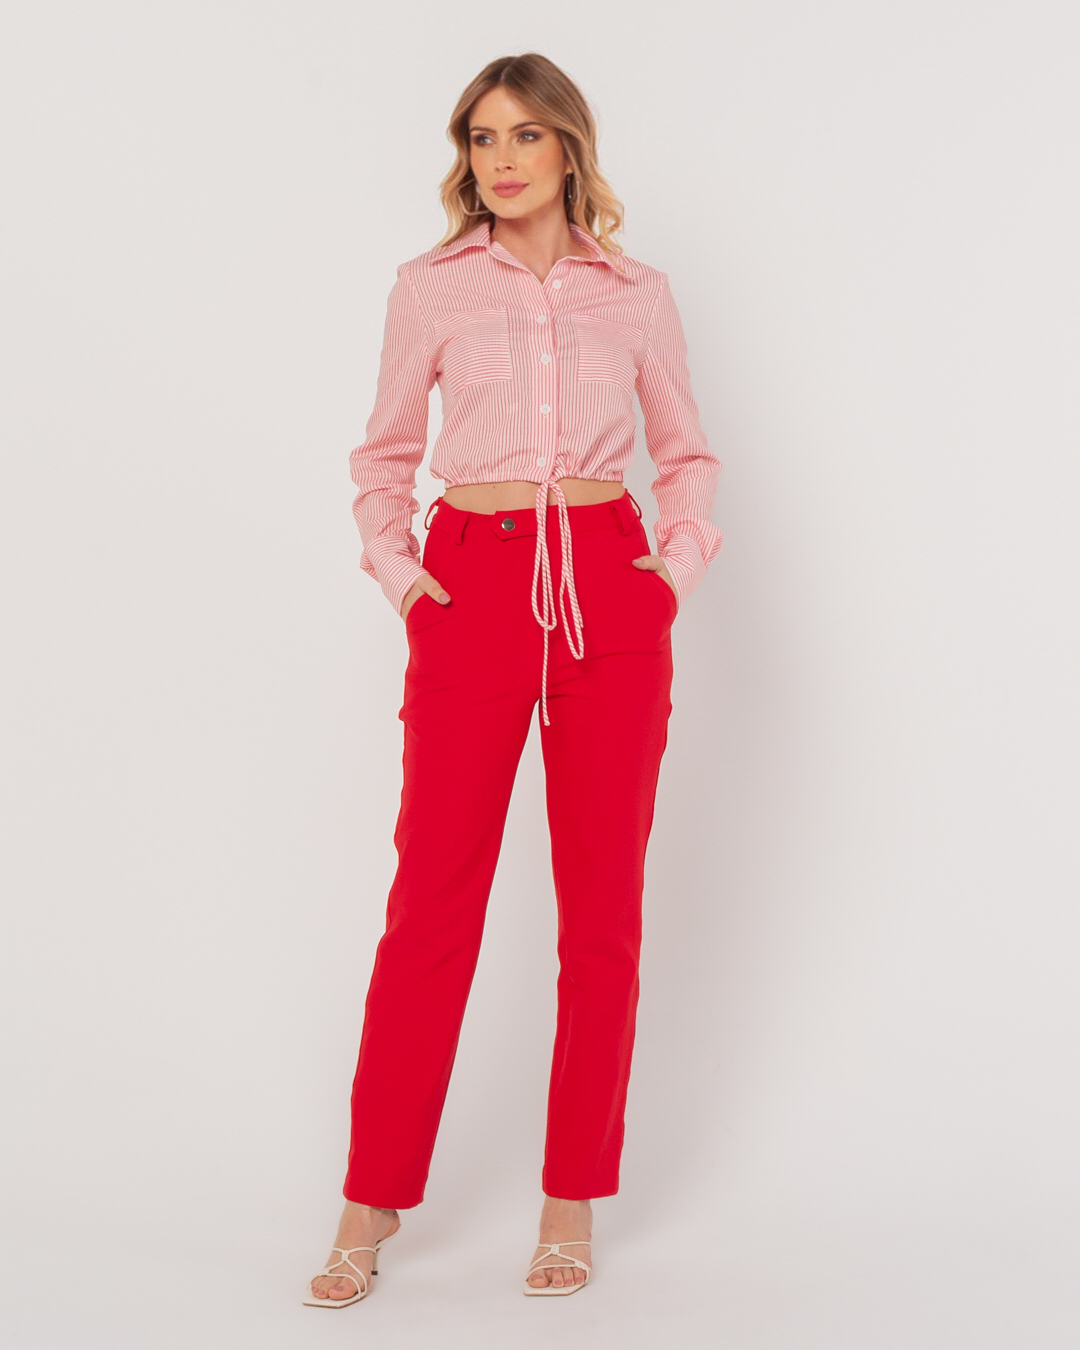 Miss Misses - Miss Misses Pants With Pockets Straight Red - 54040024